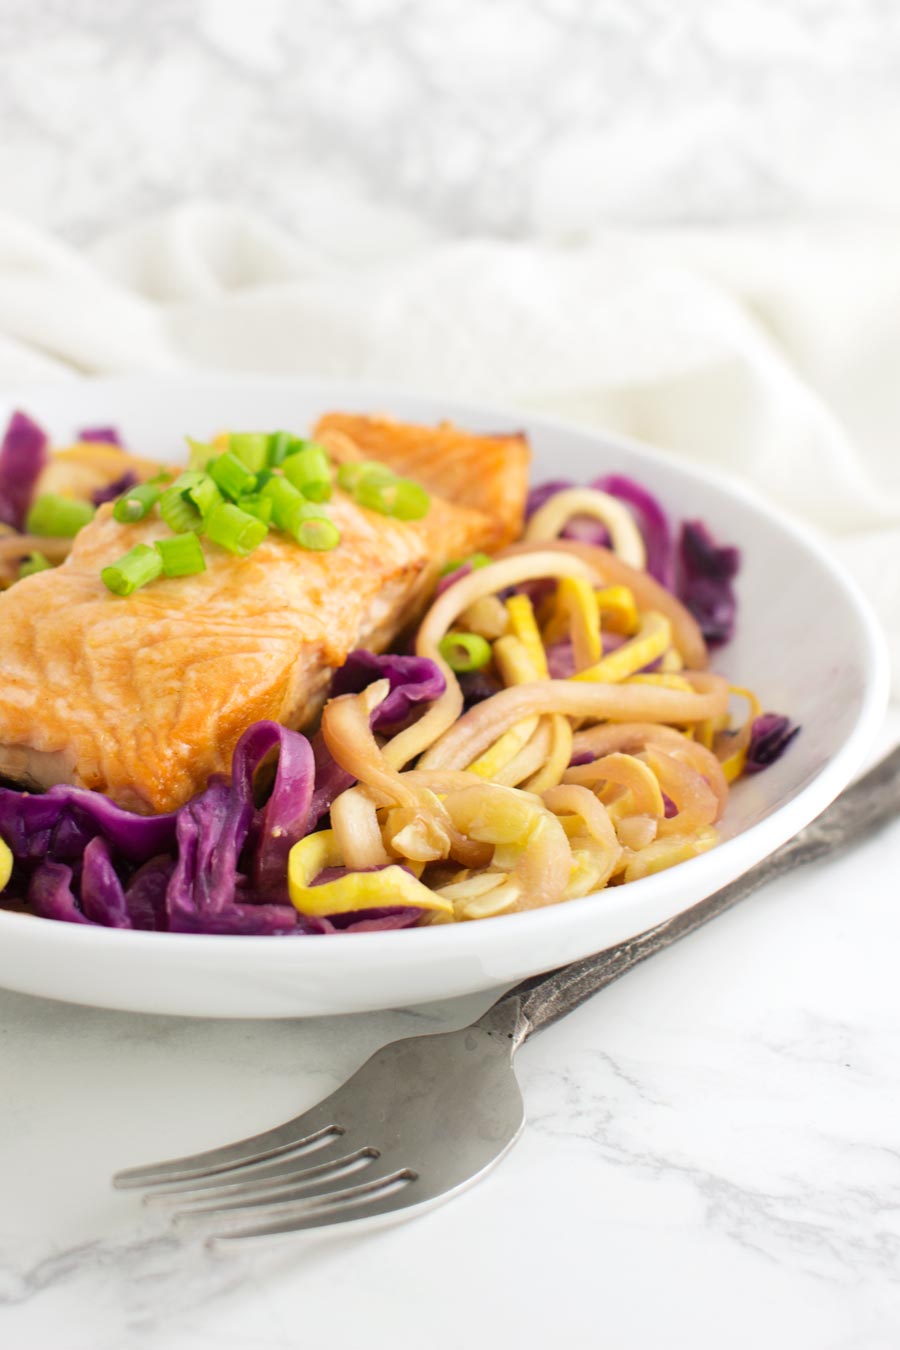 Salmon and Slaw Zoodle Bowl recipe from acleanplate.com #paleo #aip #glutenfree